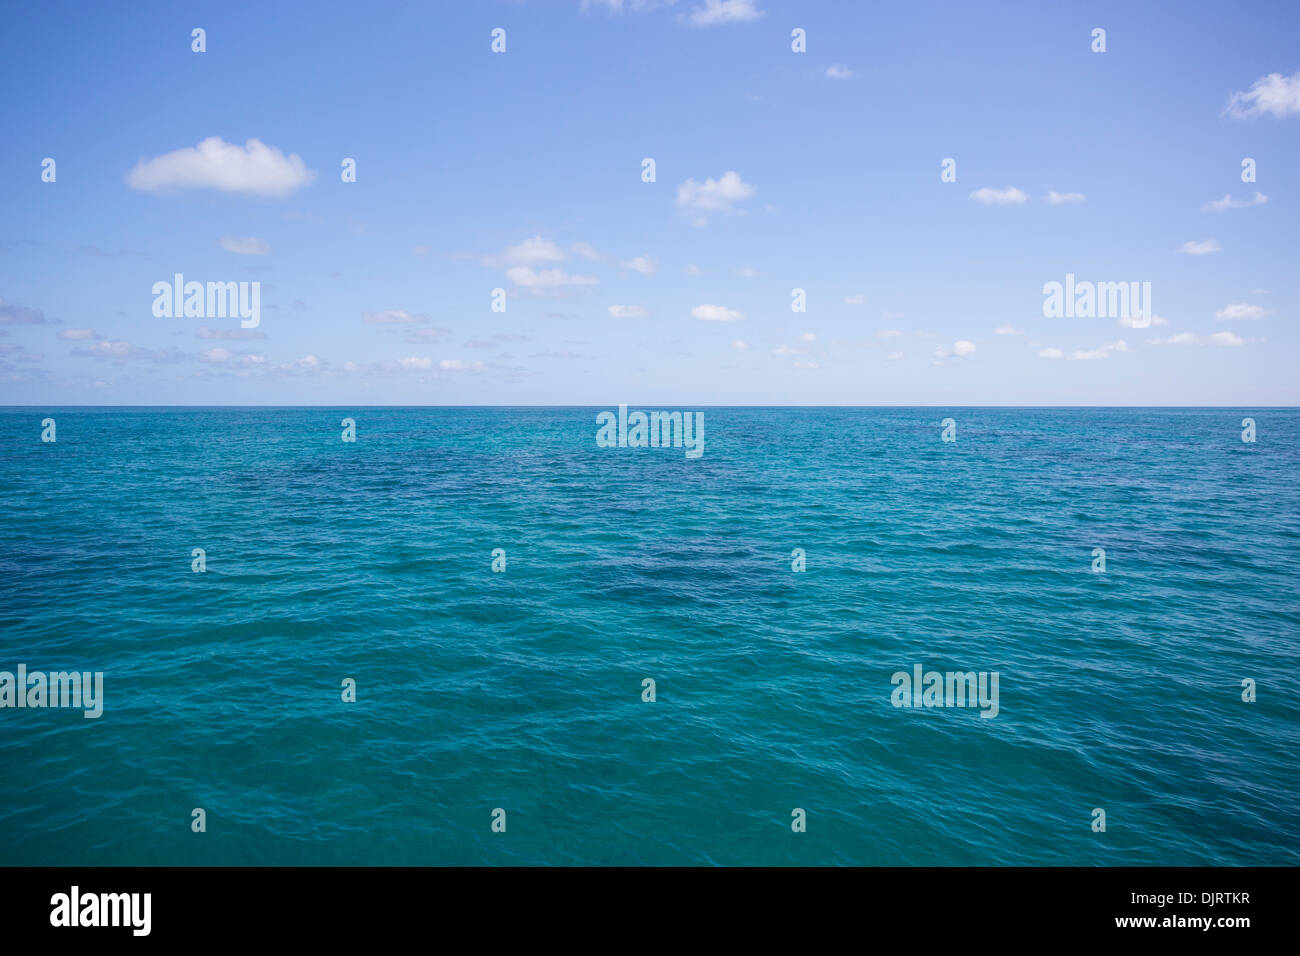 View of the Coral Sea on a sunny day with clouds in the sky, off the coast of tropical north Queensland, Australia Stock Photo